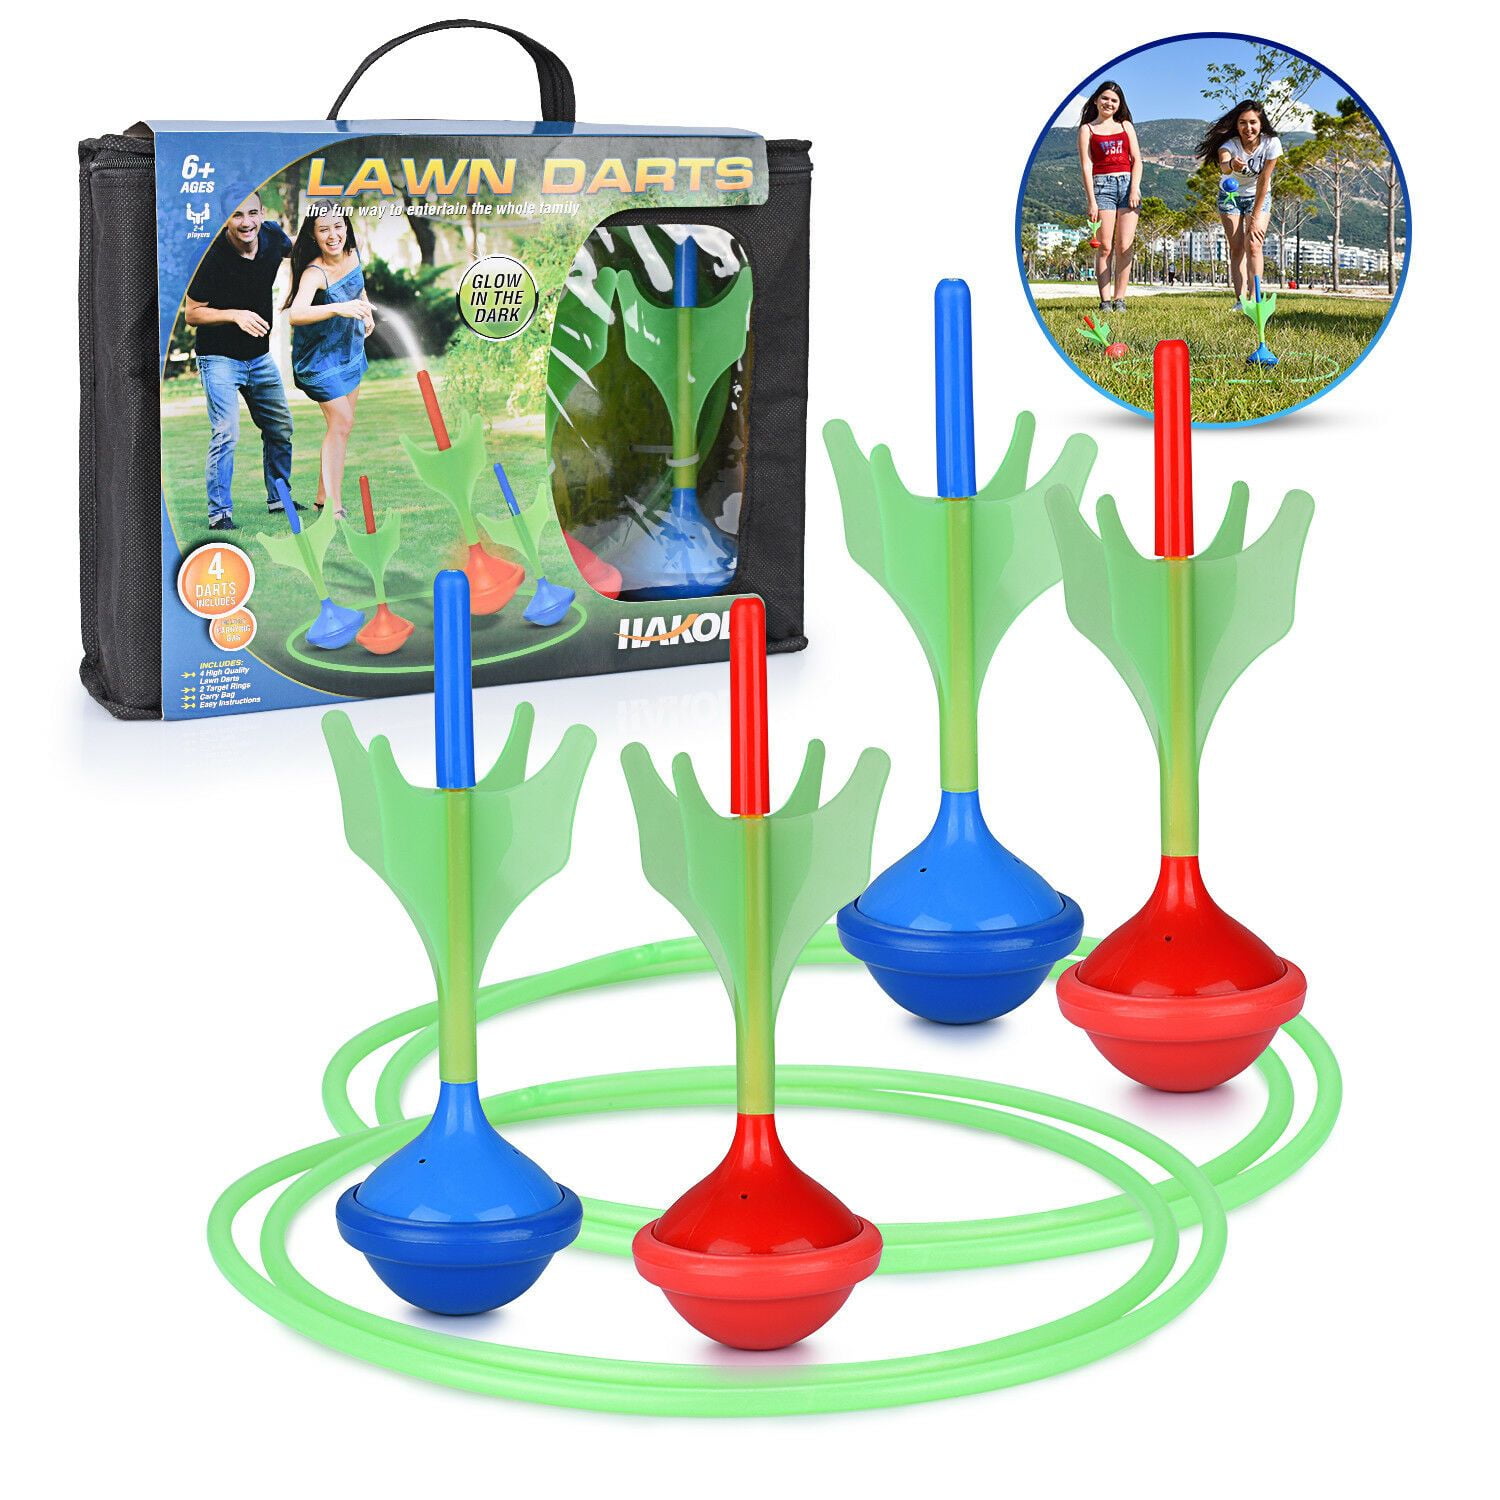 Lawn Darts Game Glow in The Dark, Outdoor Backyard Toy for Kids &amp; Adults